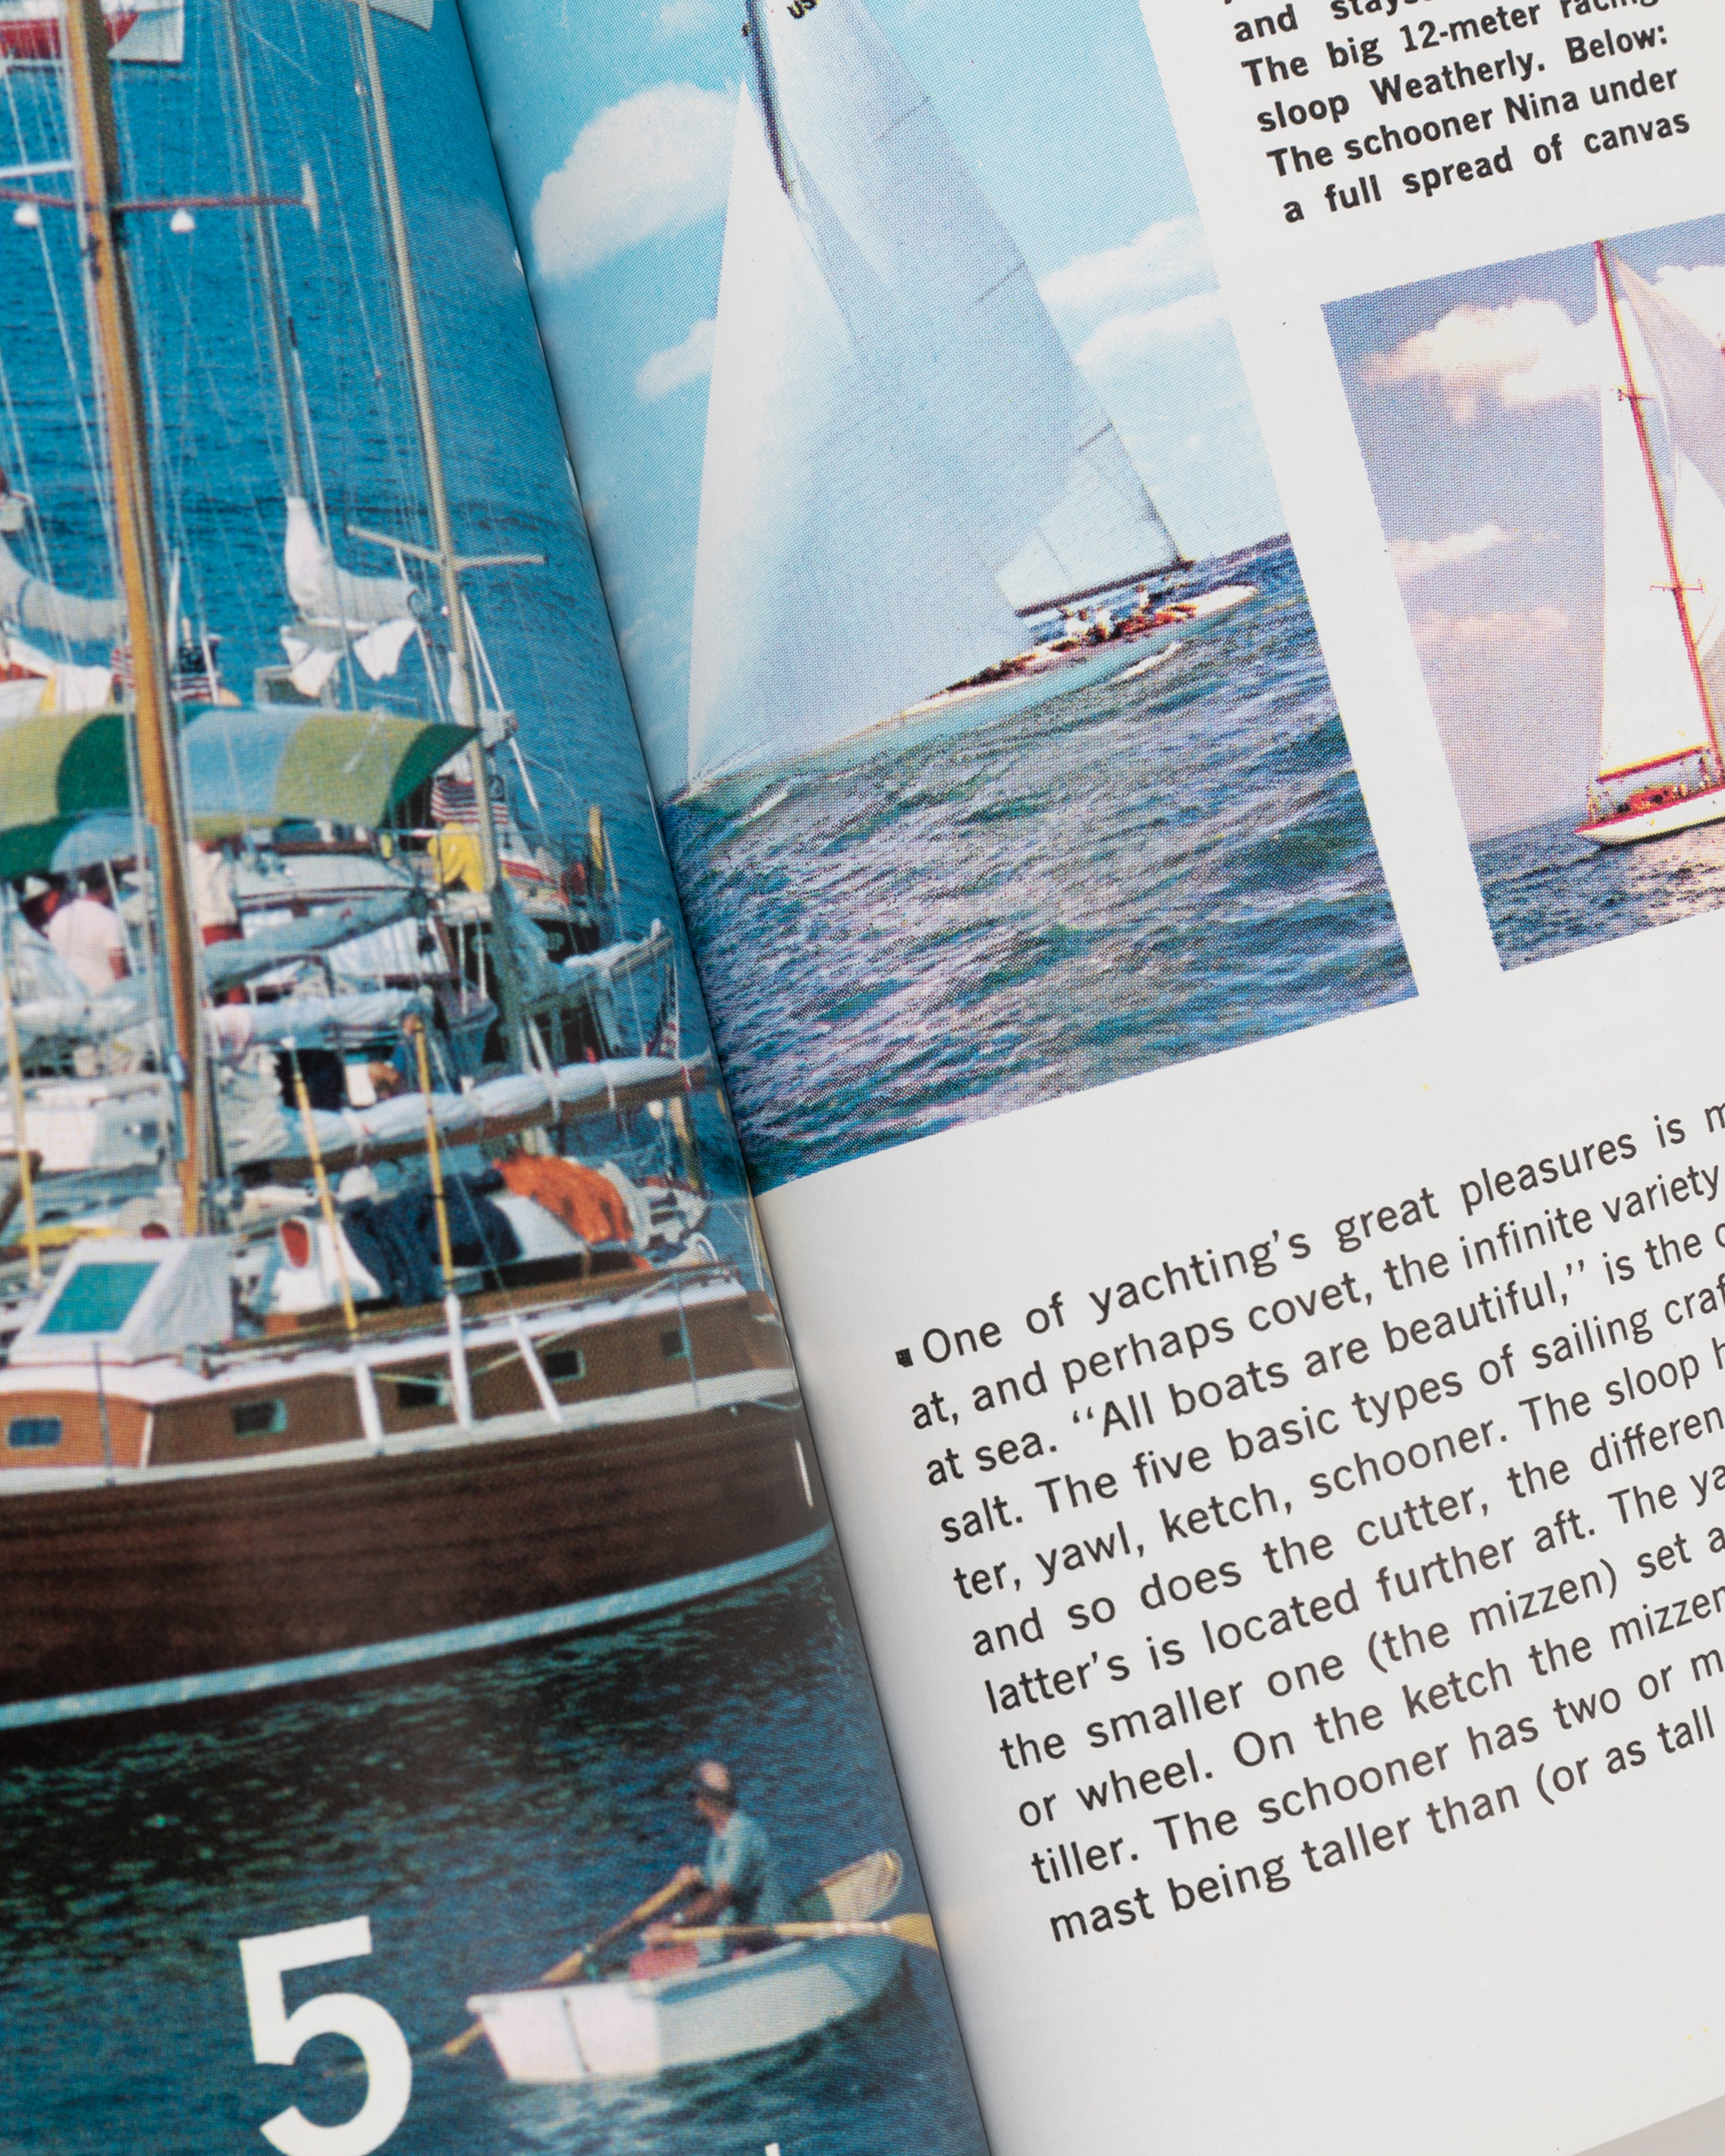 Sailing: A Guide to Handling, Equipping, Maintaining, and Buying the Small Sail Boat